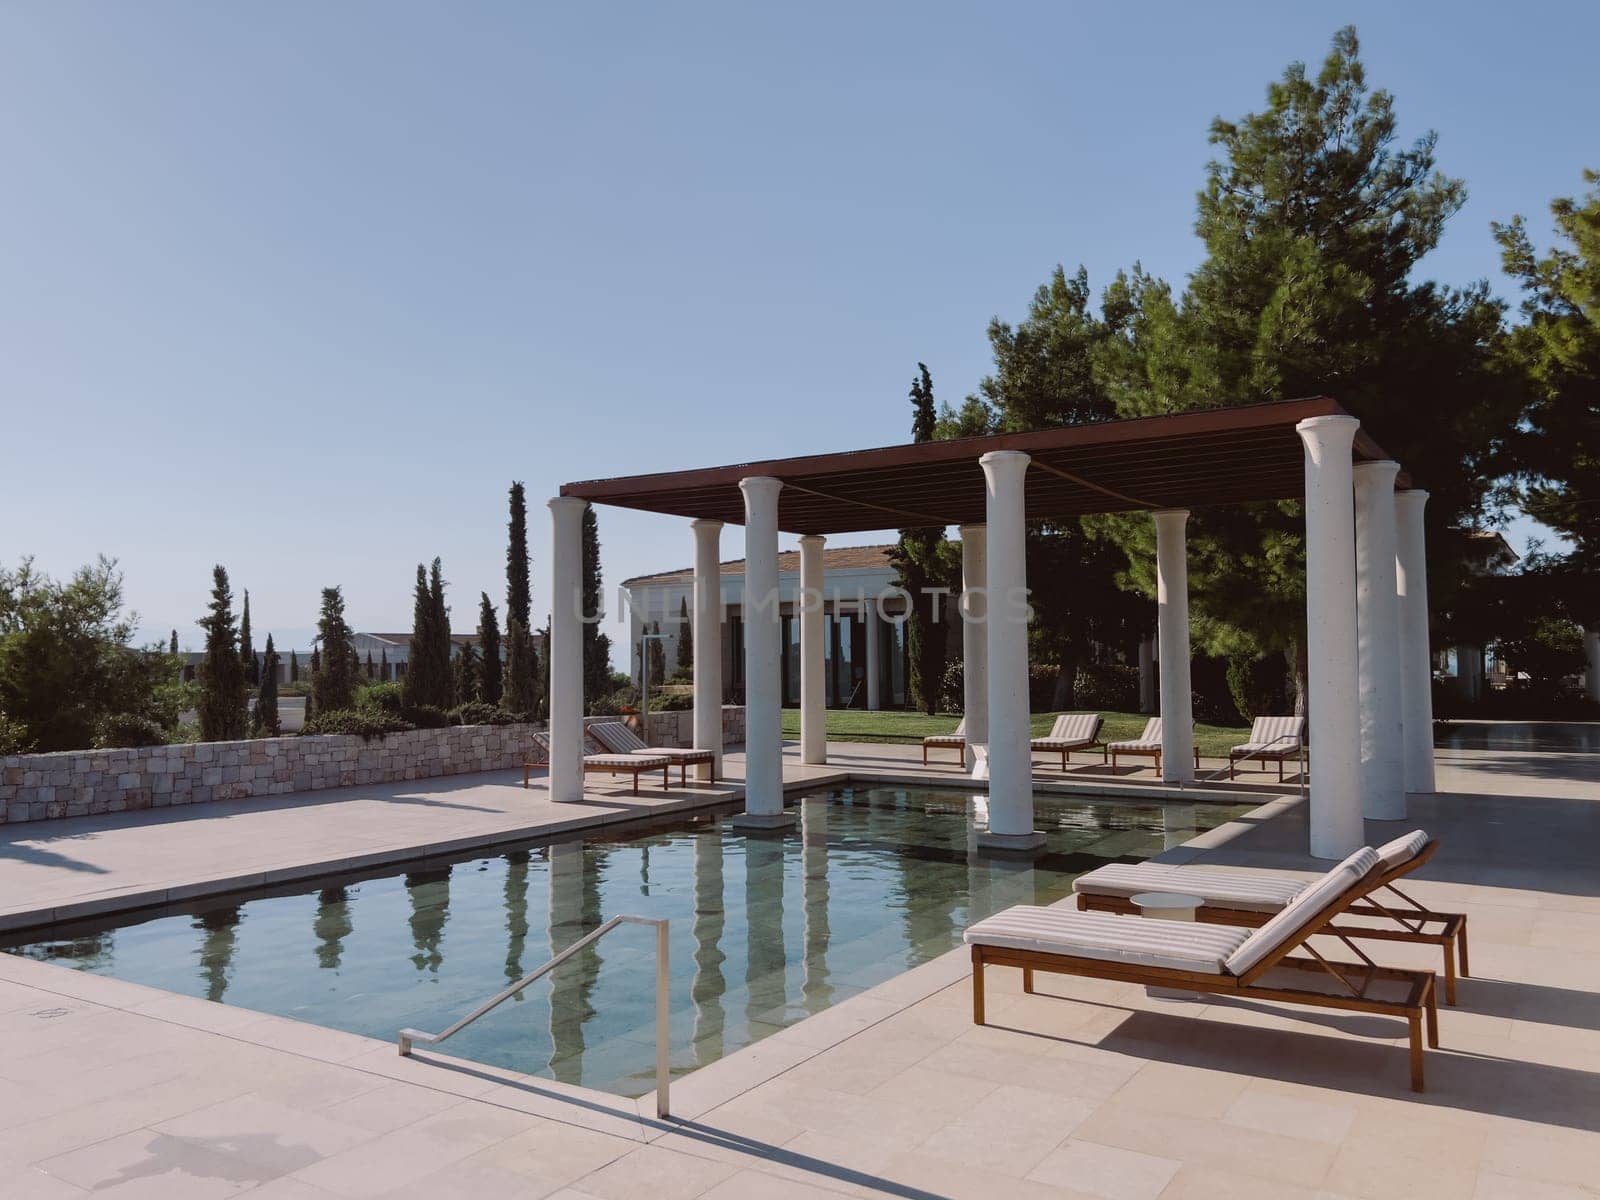 Pergola with columns near the pool with sun loungers surrounded by trees. Hotel Amanzoe, Greece. High quality photo